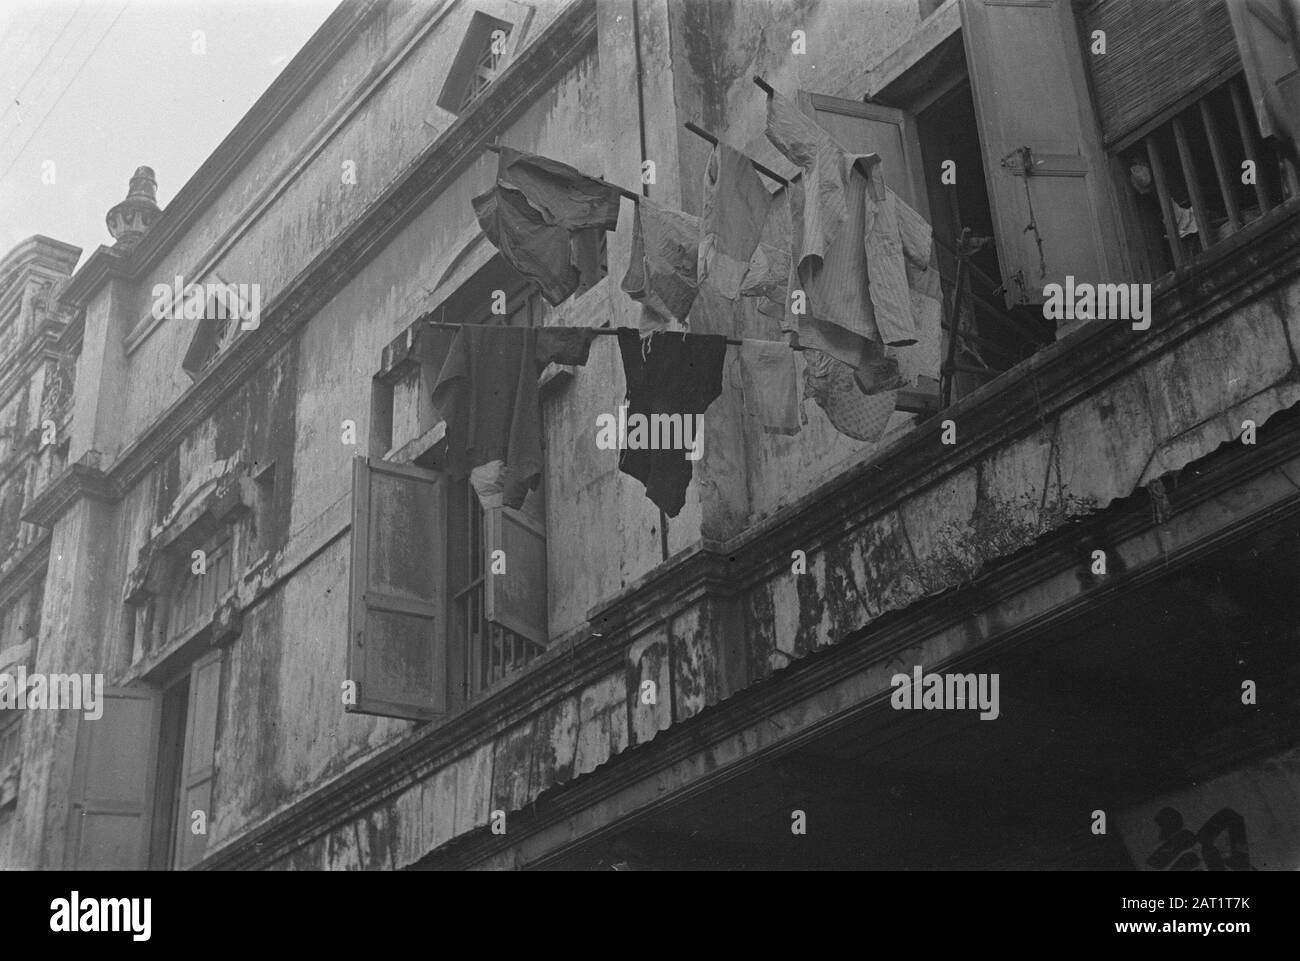 Photo Reportage Palembangs  Laundry hangs to dry on sticks stuck from a window of a building in PalembangDate: 1947 Location: Indonesia, Dutch East Indies  :  Unknown/DLC Stock Photo